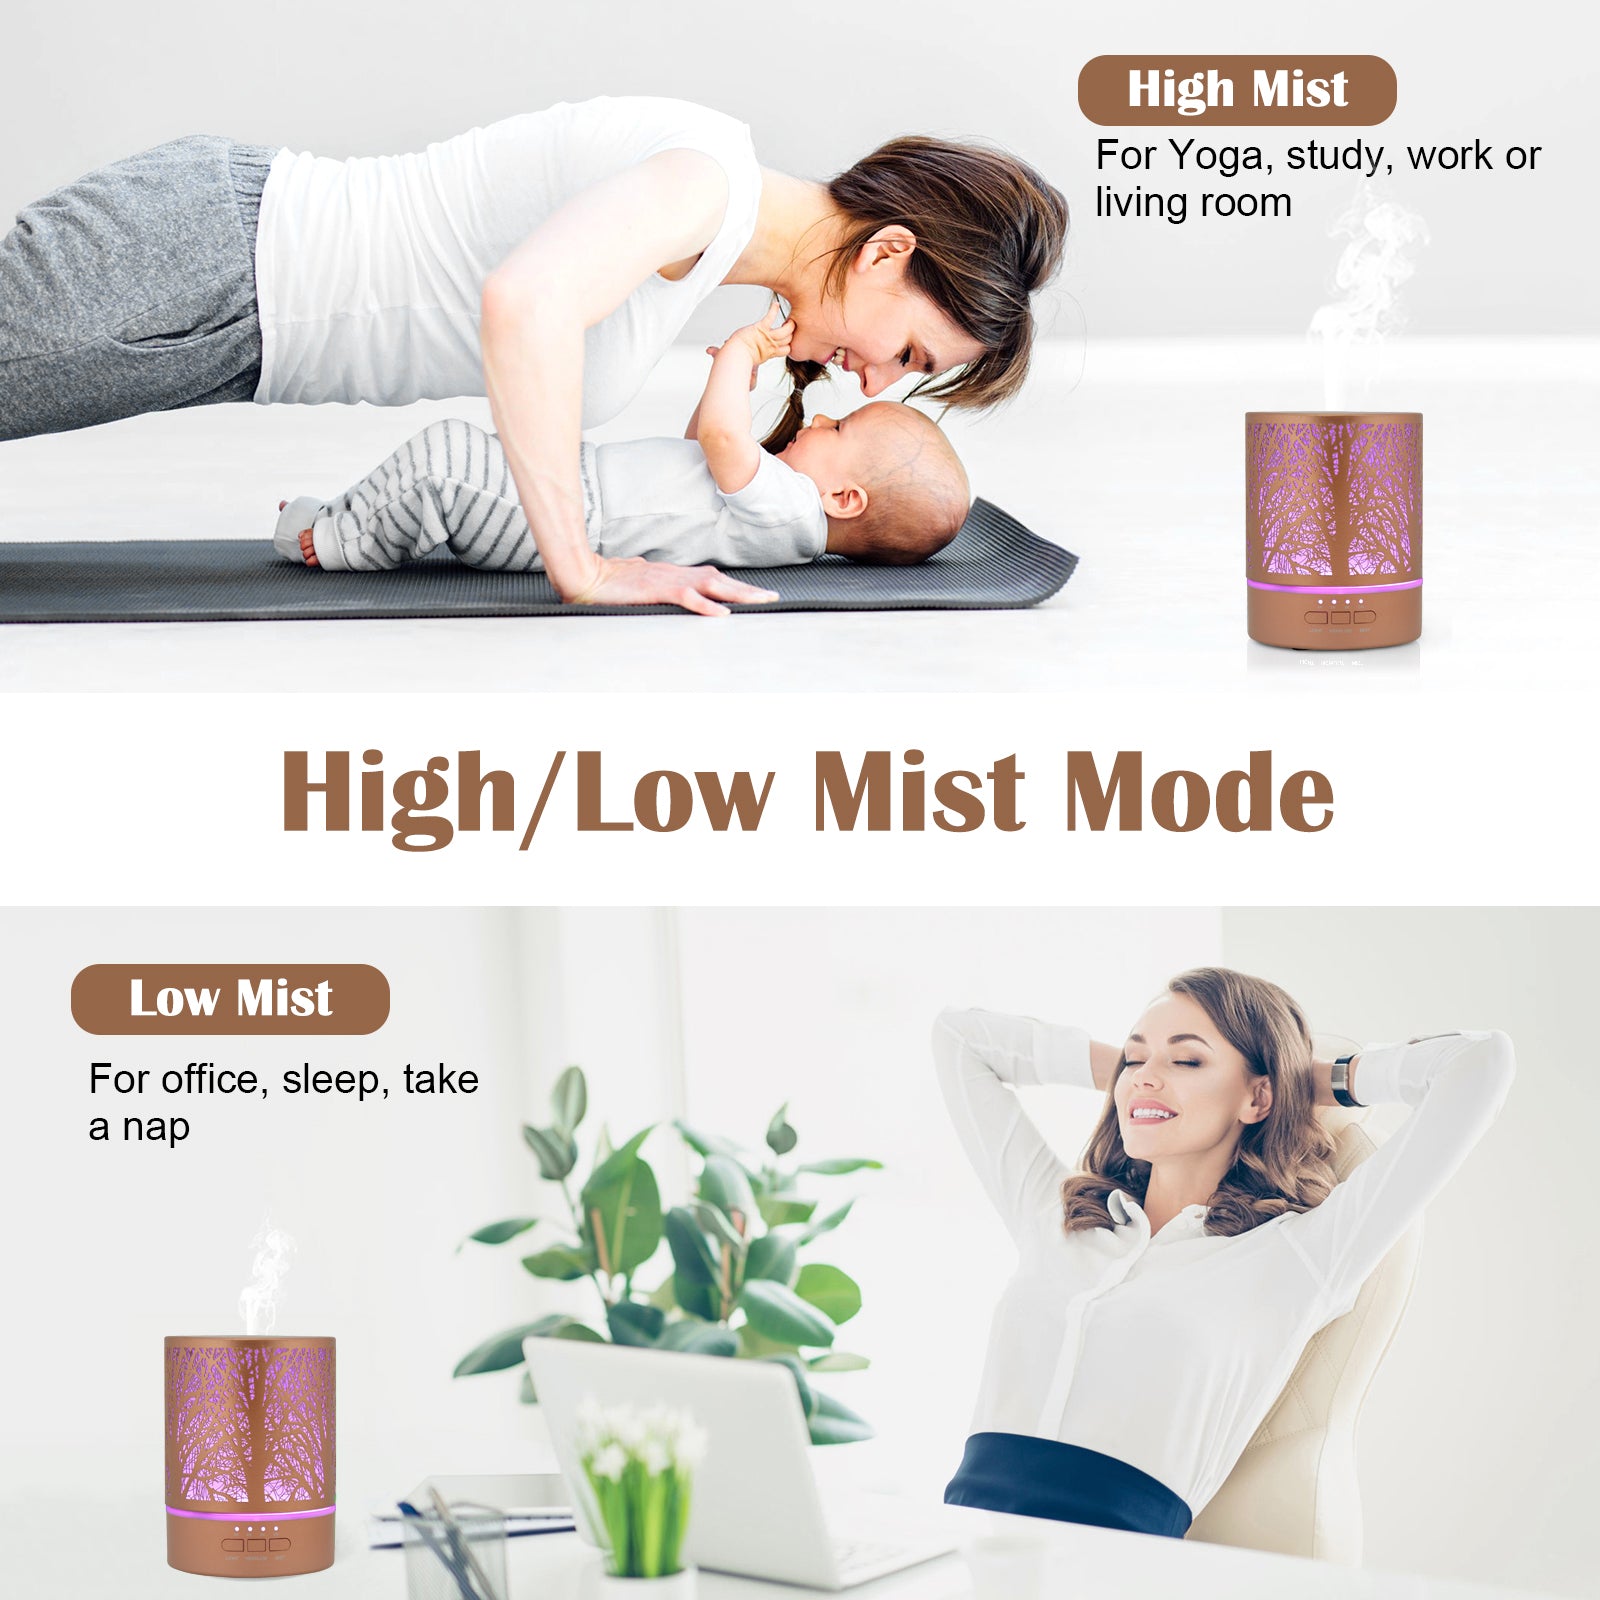 Naturalis Essence of Nature Rose Gold Mist Ultrasonic Aroma Diffuser & Humidifier with 30ml Diffuser Oil Design for Long Lasting Fragrant Ambience - Naturalis